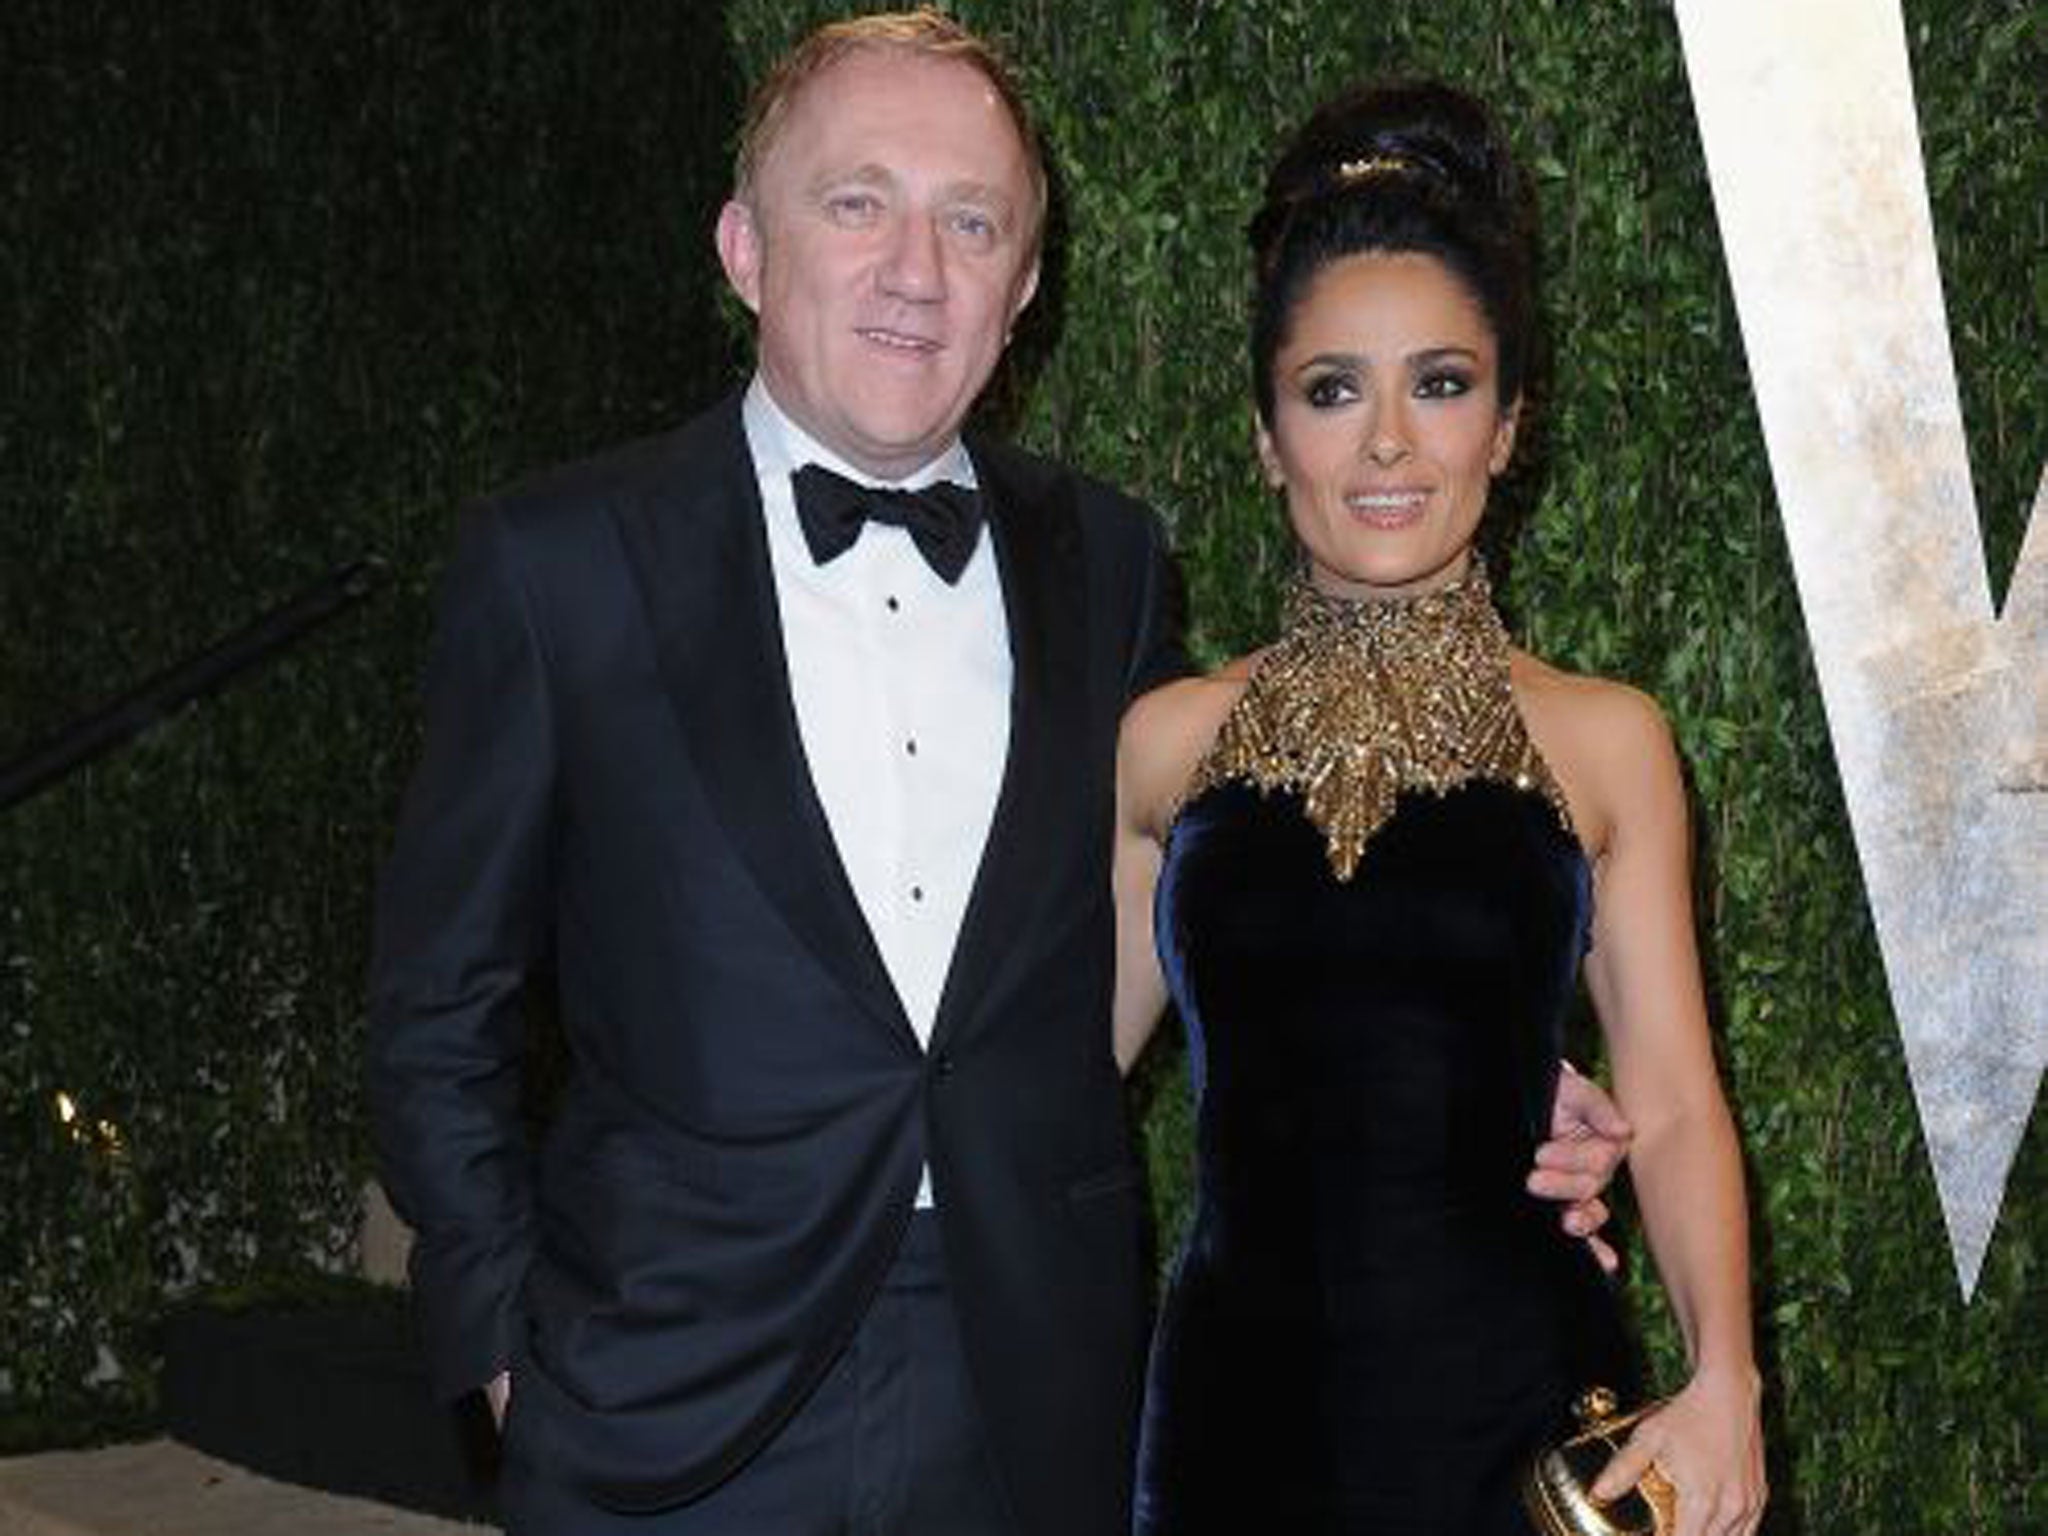 On the arm of his film star wife, Salma Hayek, at least François-Henri Pinault gets recognised in Hollywood and business circles